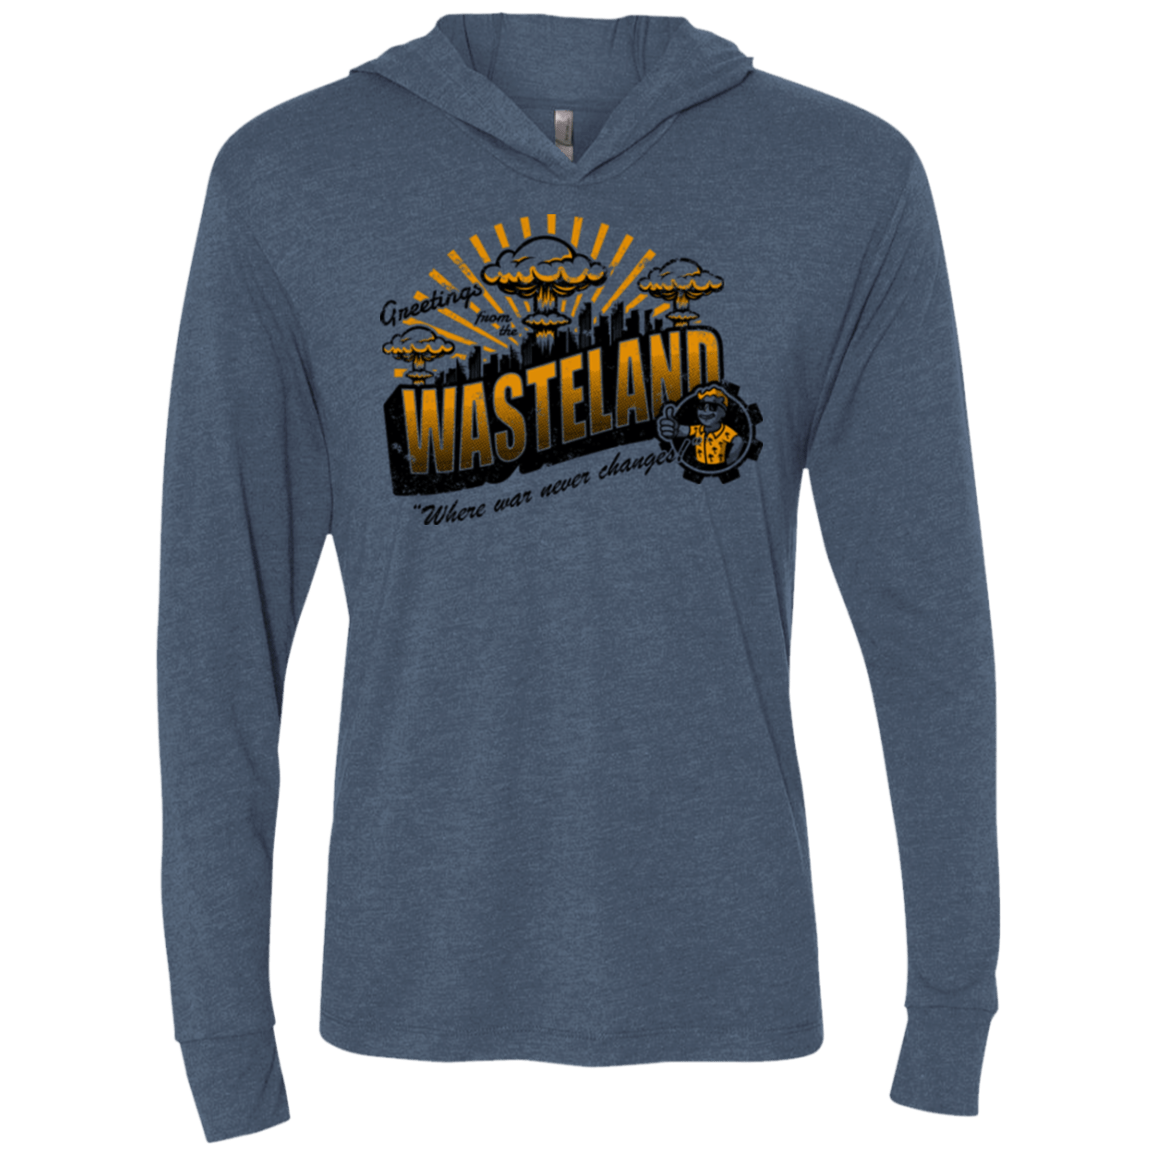 T-Shirts Indigo / X-Small Greetings from the Wasteland! Triblend Long Sleeve Hoodie Tee